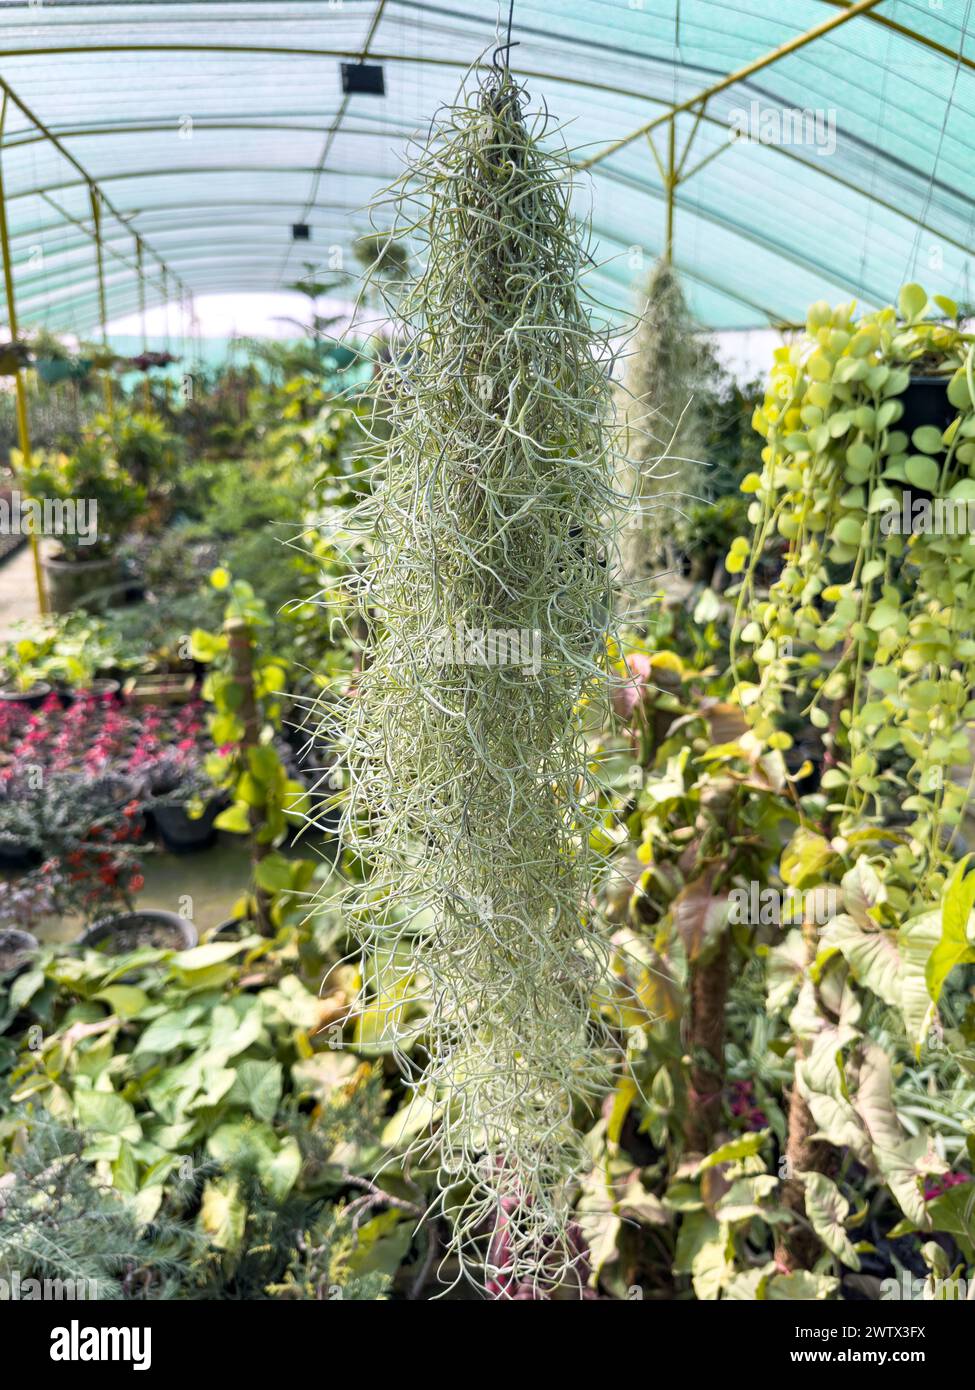 Tillandsia usneoides Spanish moss hanging in a greenhouse Stock Photo